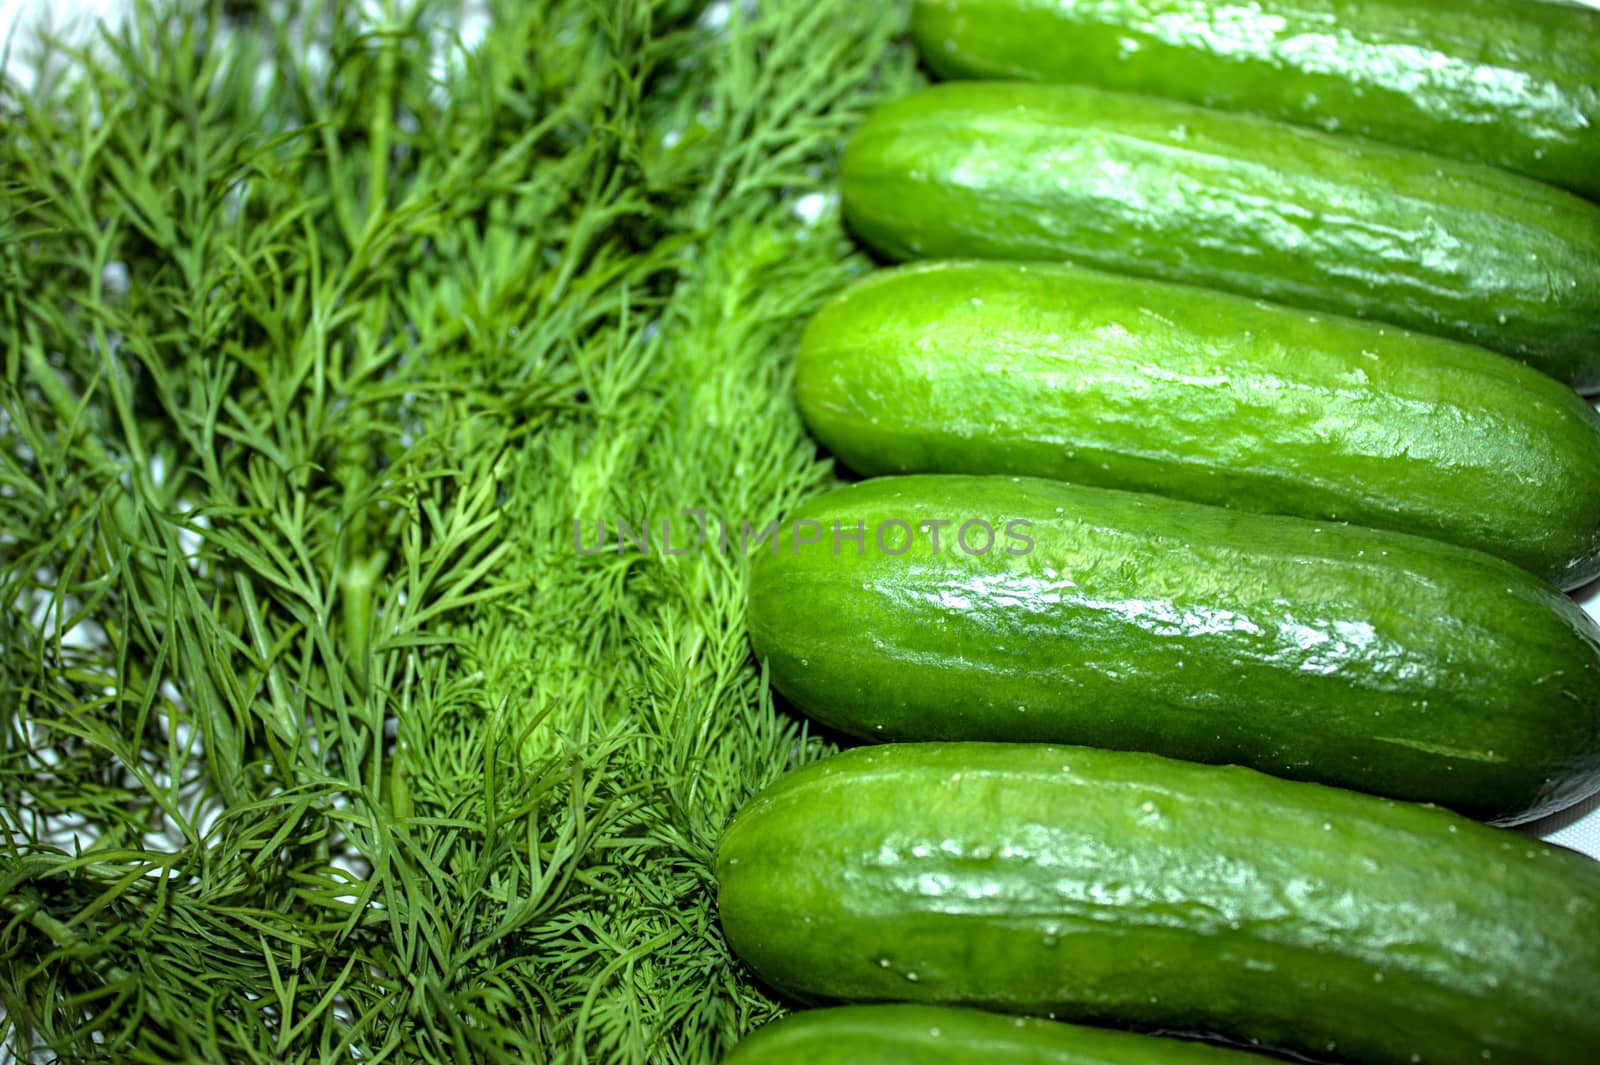 The picture shows little cucumber and fresh dill